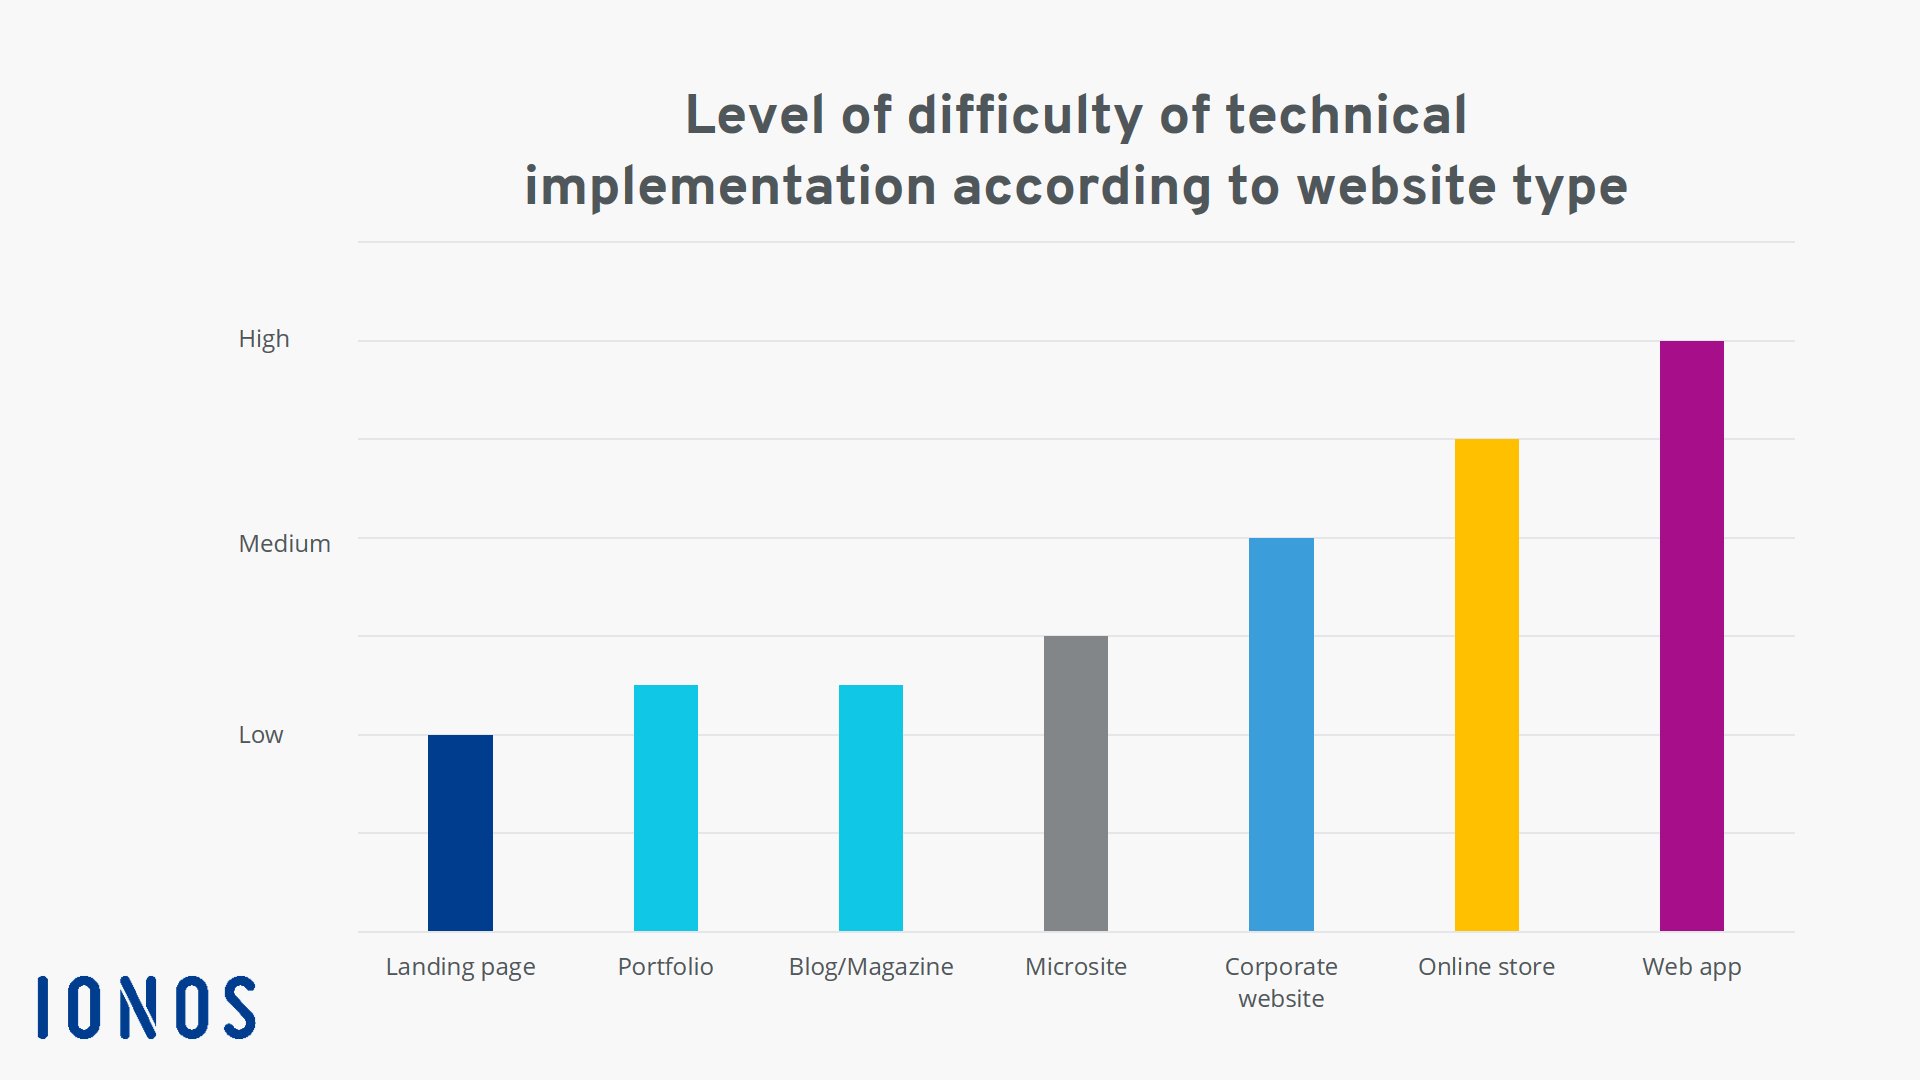 Websites ranked by technical difficulty